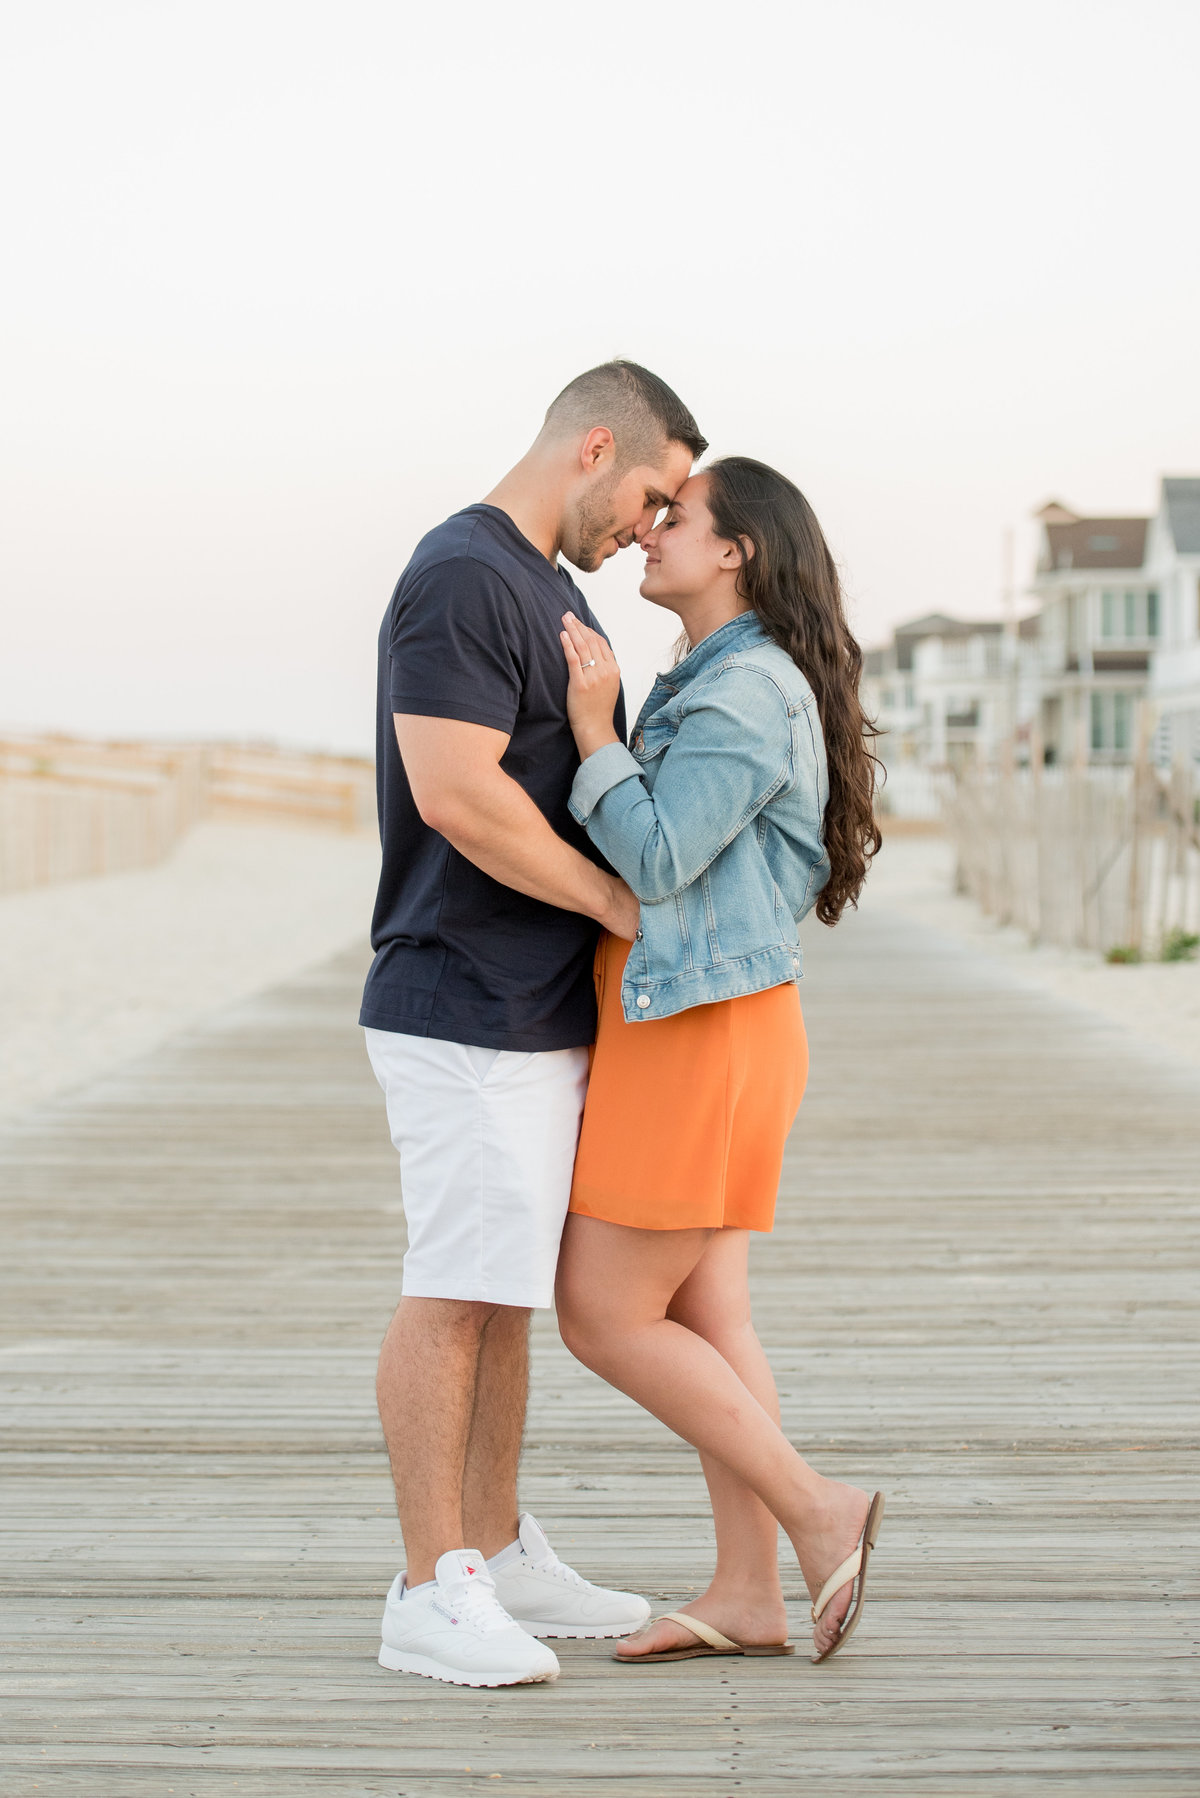 lisa-albino-lavallette-beach-surprise-proposal-imagery-by-marianne-2019-94